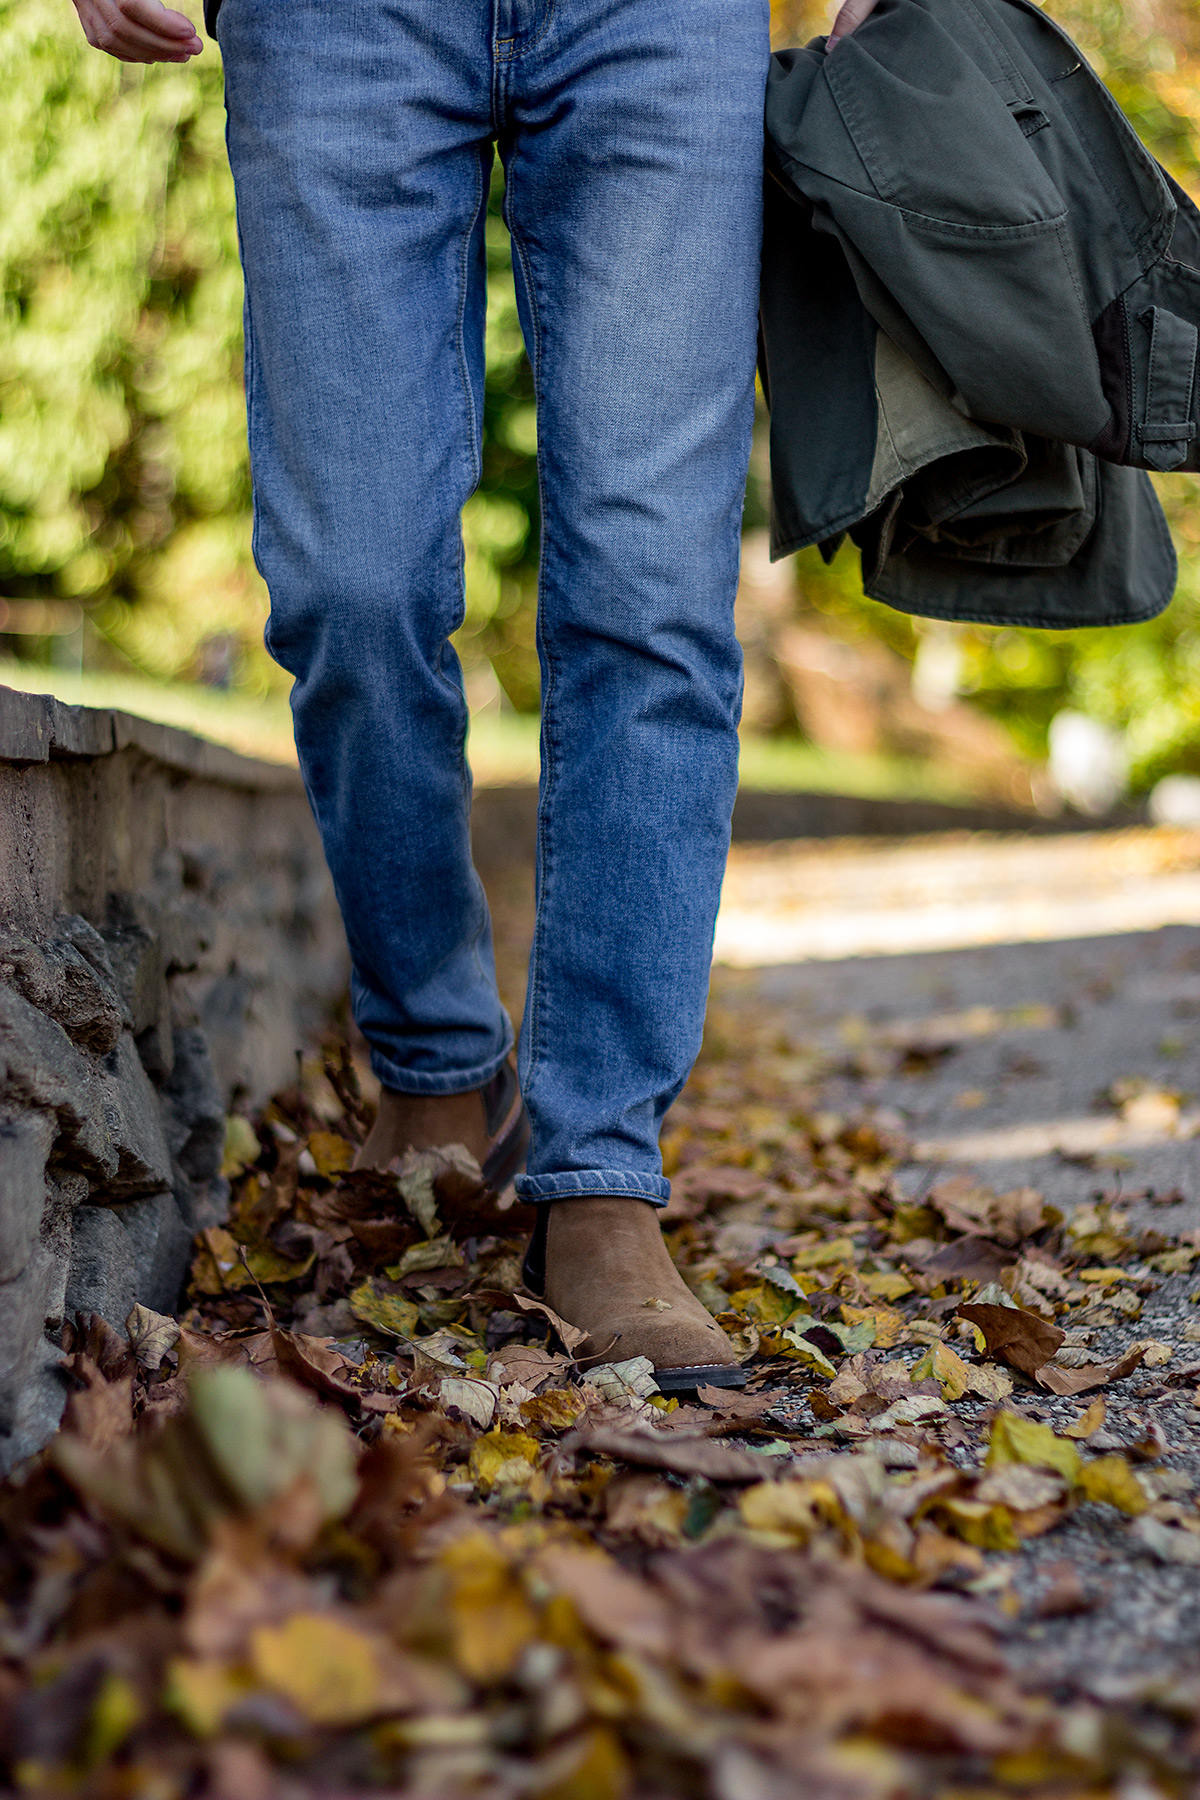 The 10 Best Fall Shoes for Men - The 